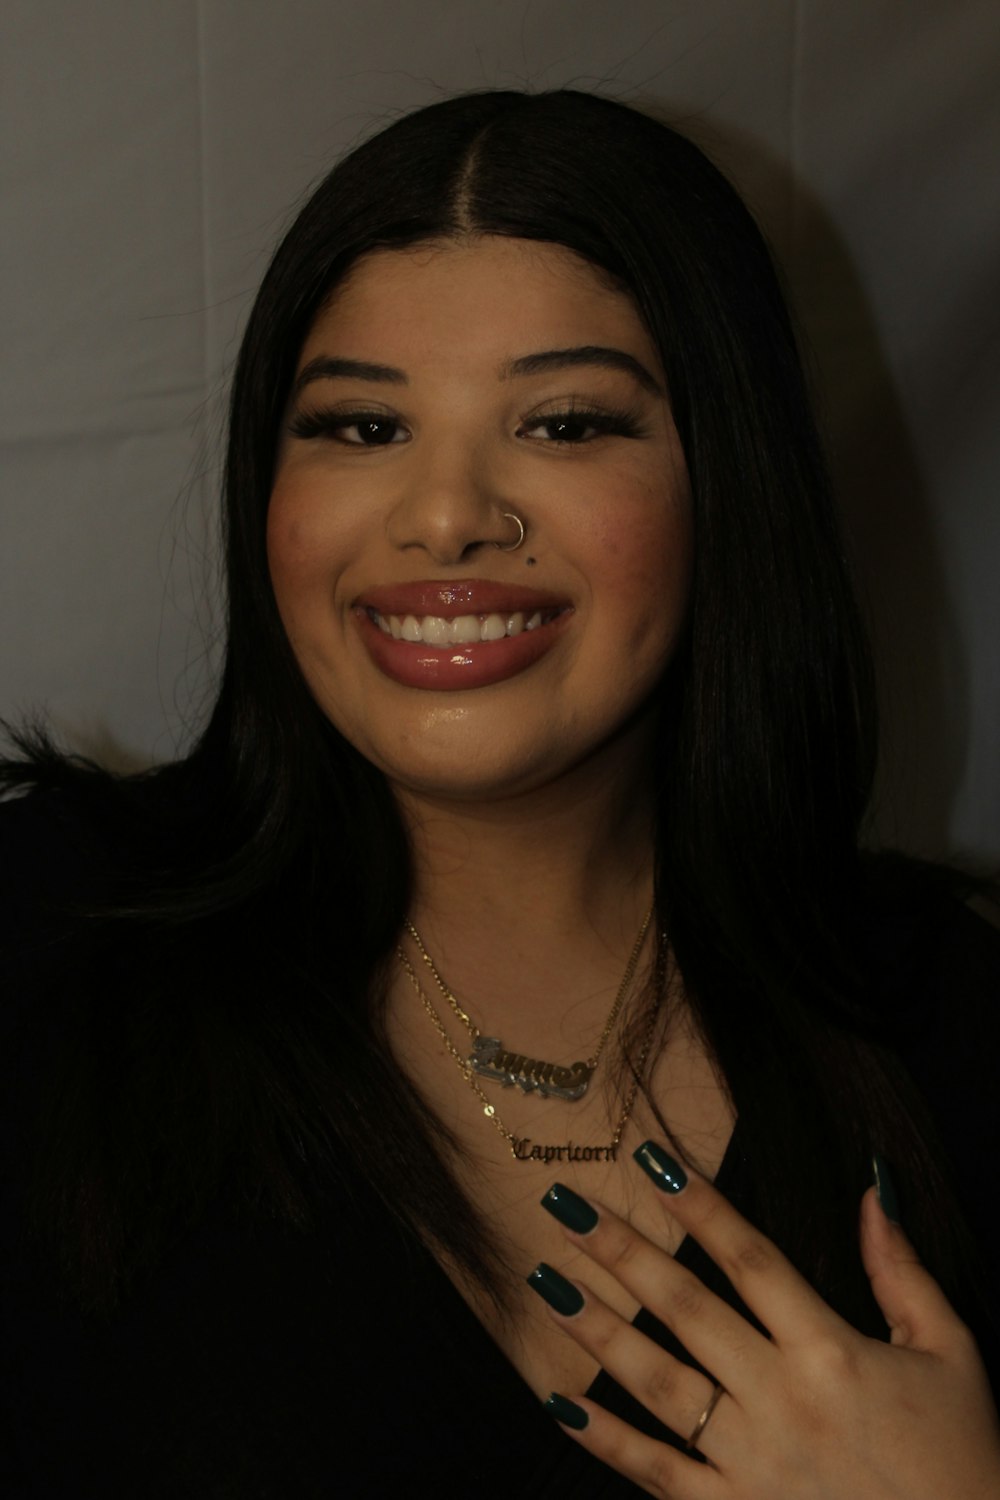 a woman with a nose ring smiling at the camera